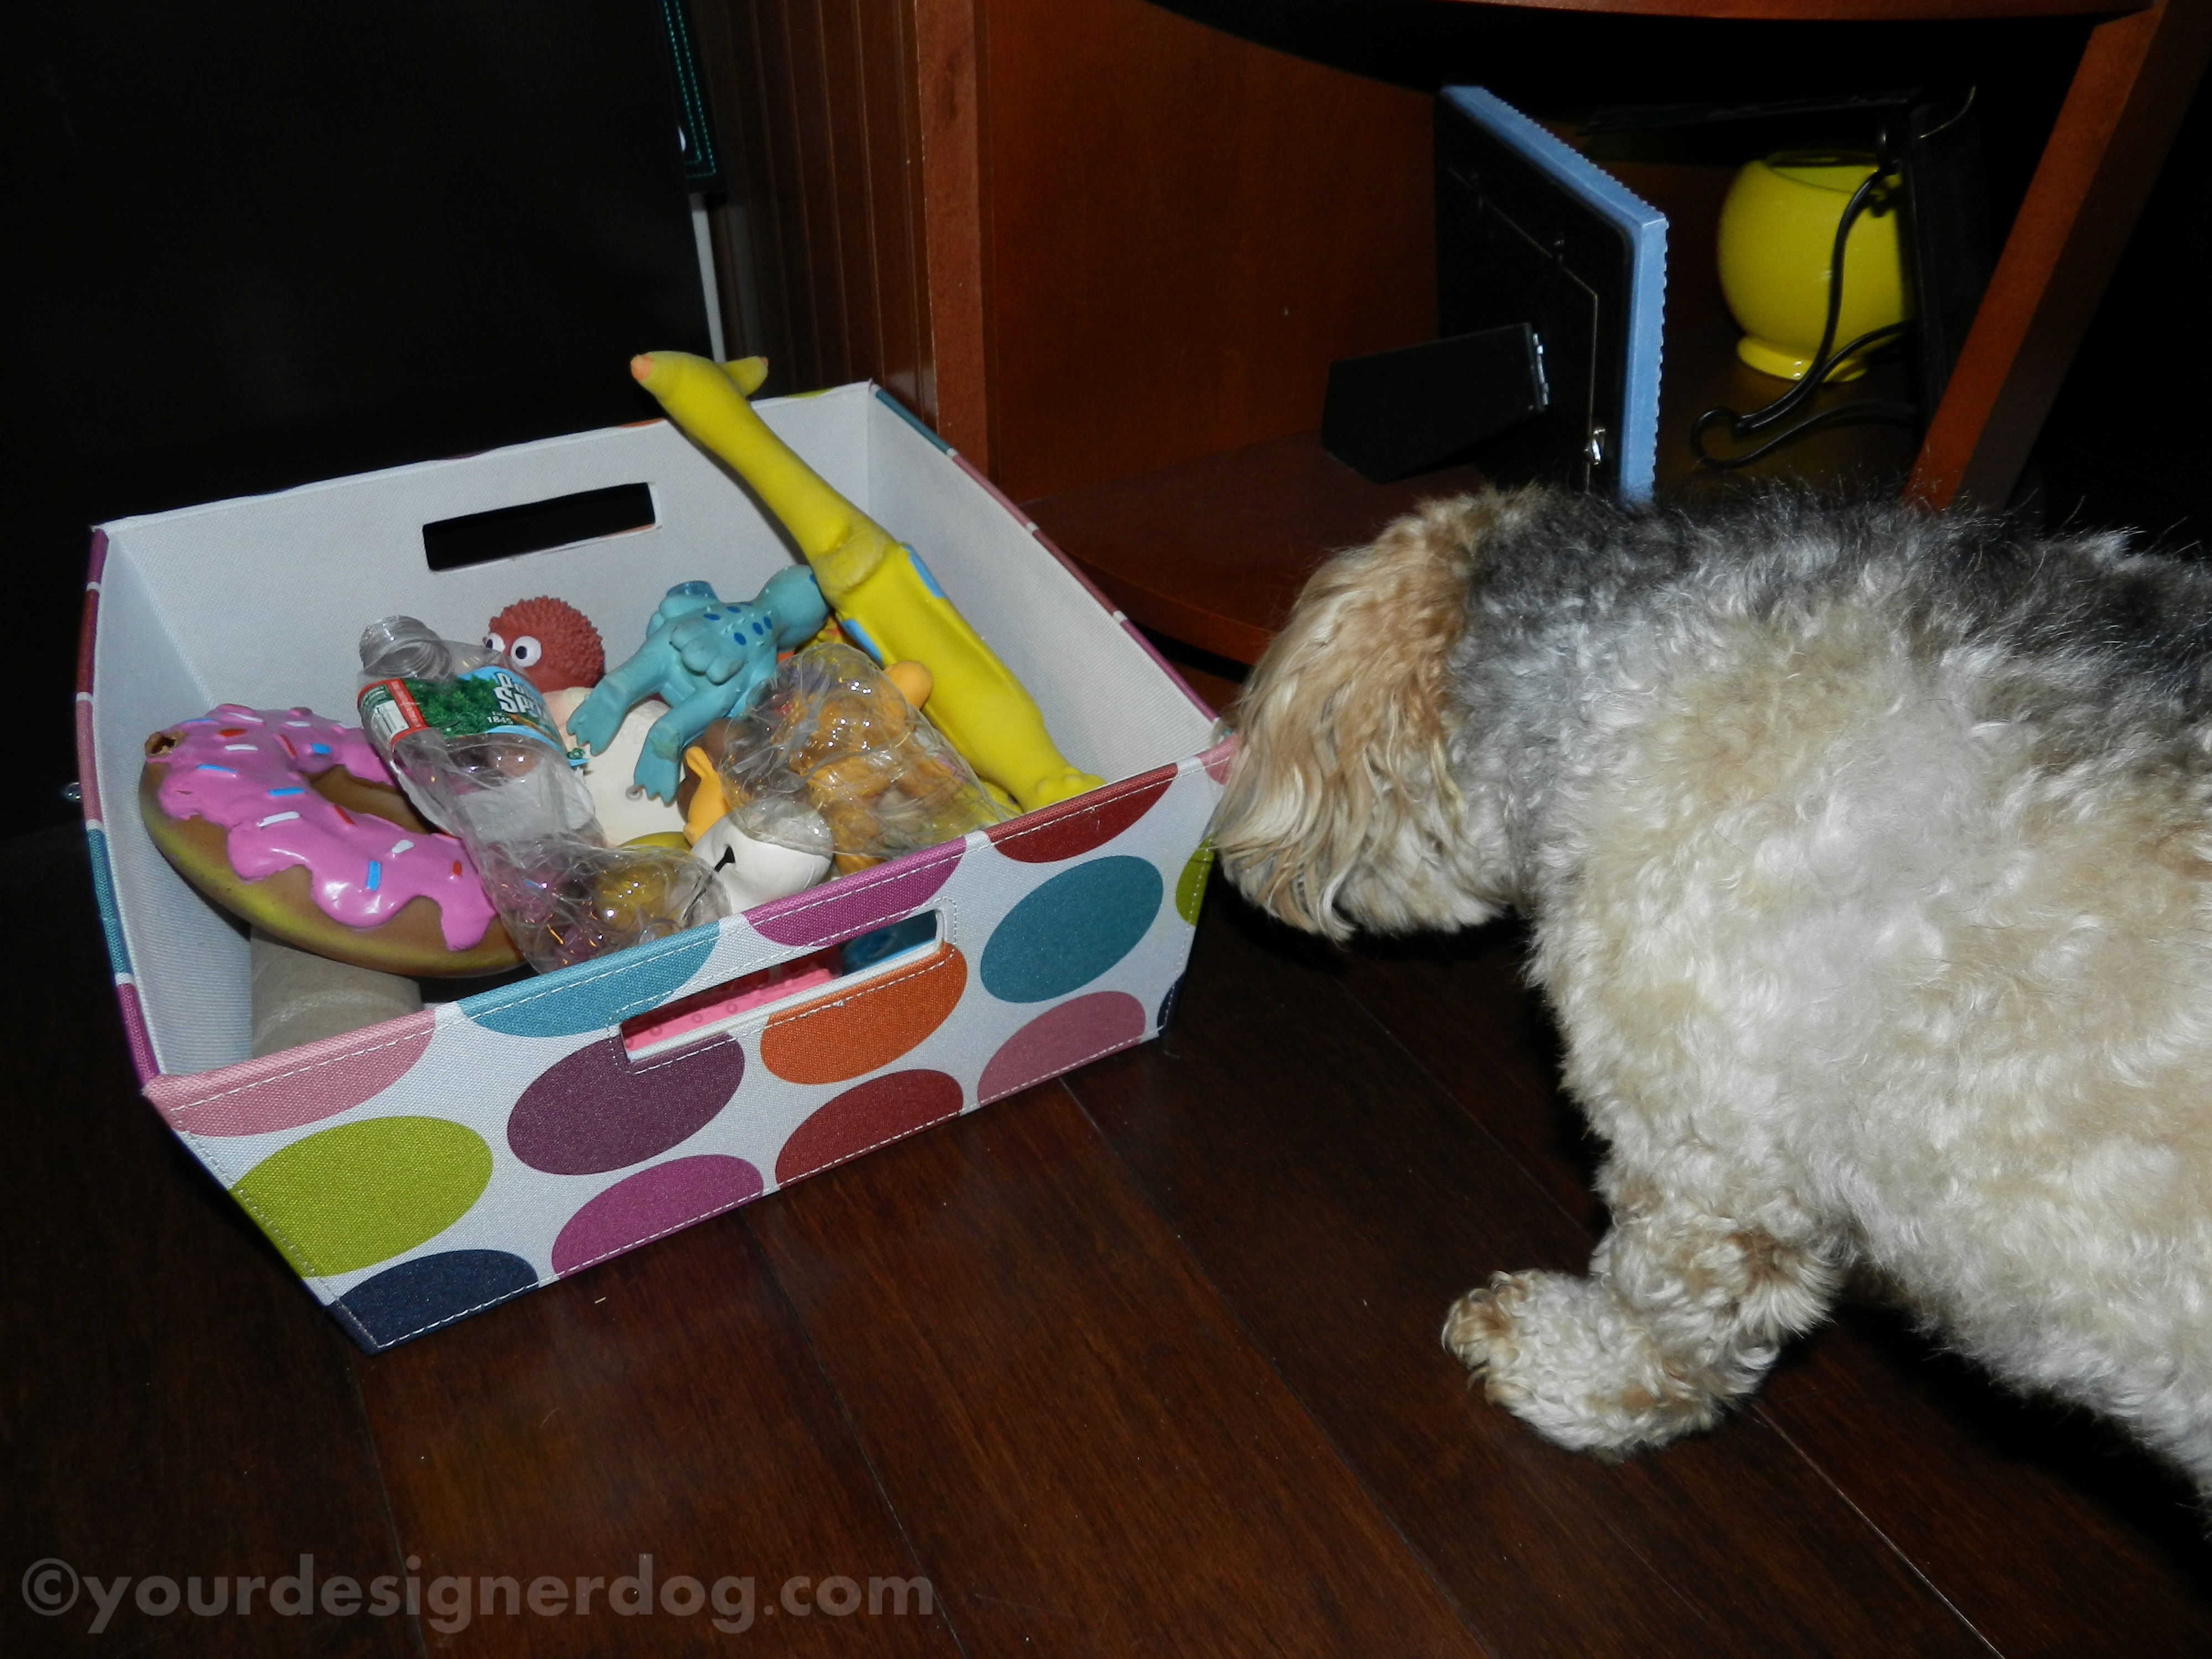 dogs, designer dogs, yorkipoo, yorkie poo, toy box, dog toys